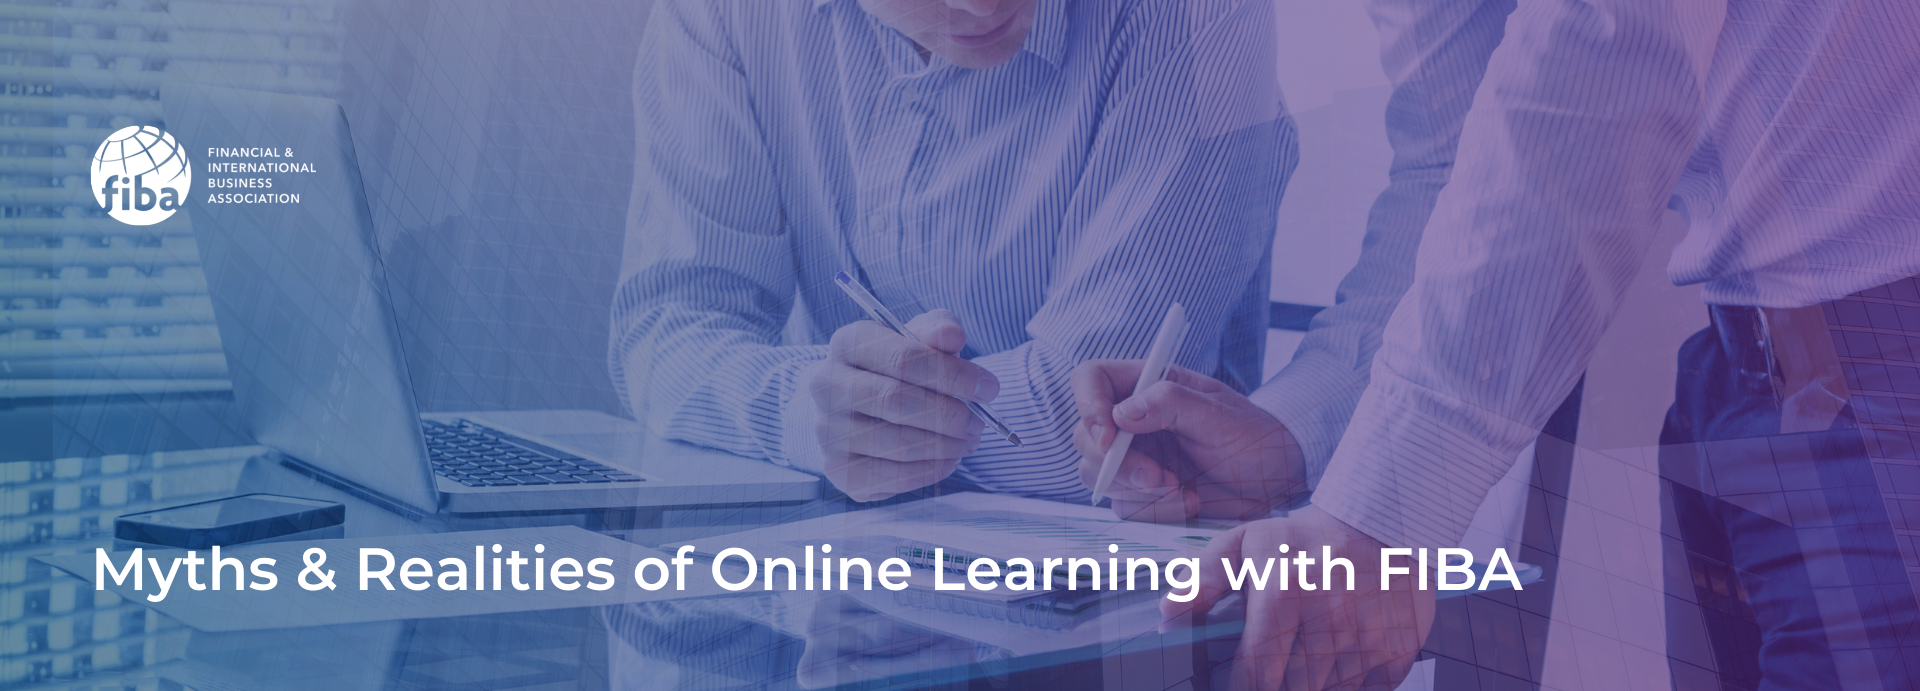 Myths and Realities of Online Learning with FIBA